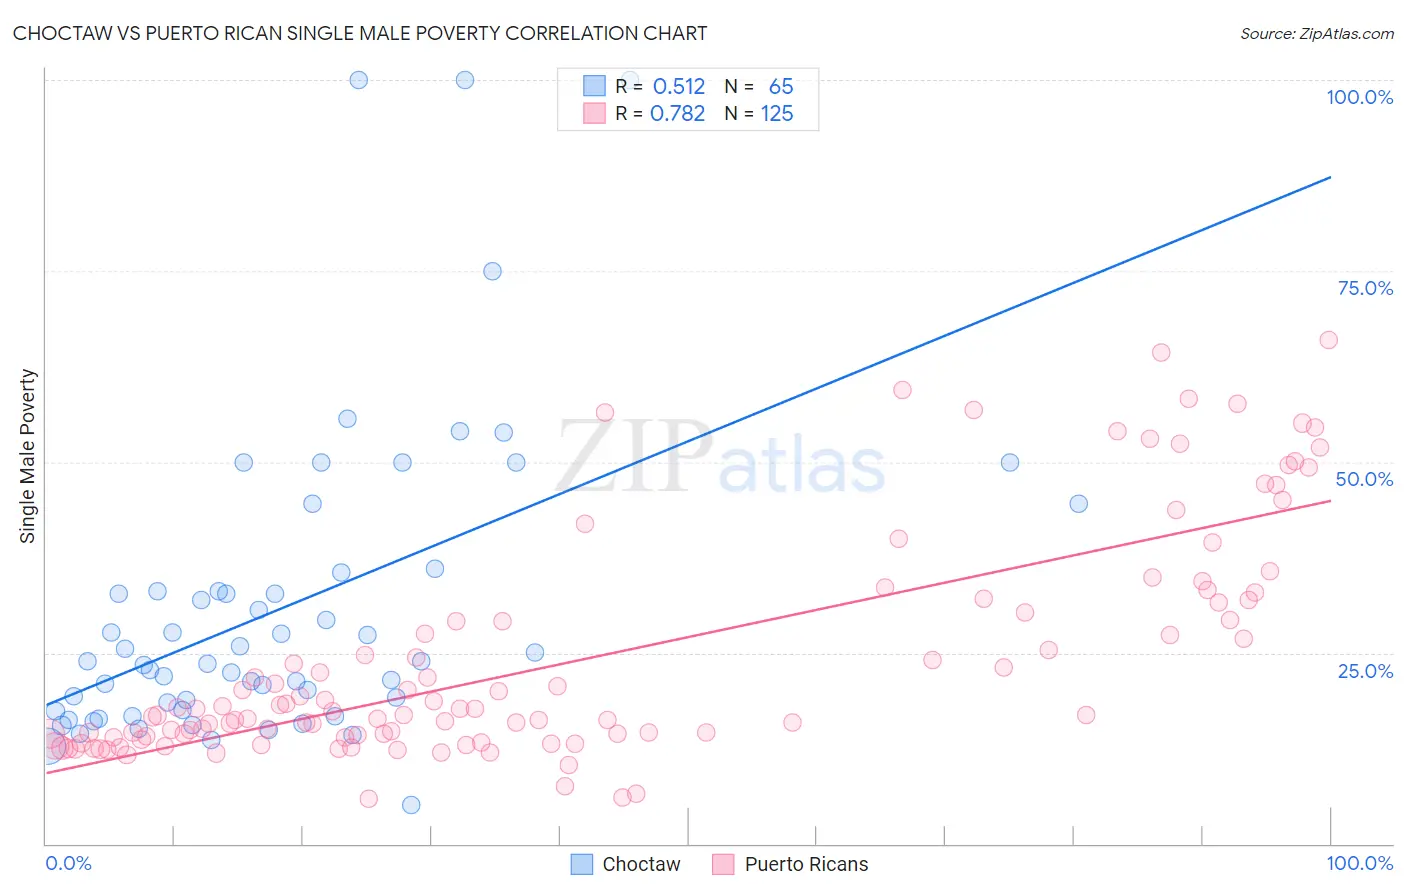 Choctaw vs Puerto Rican Single Male Poverty